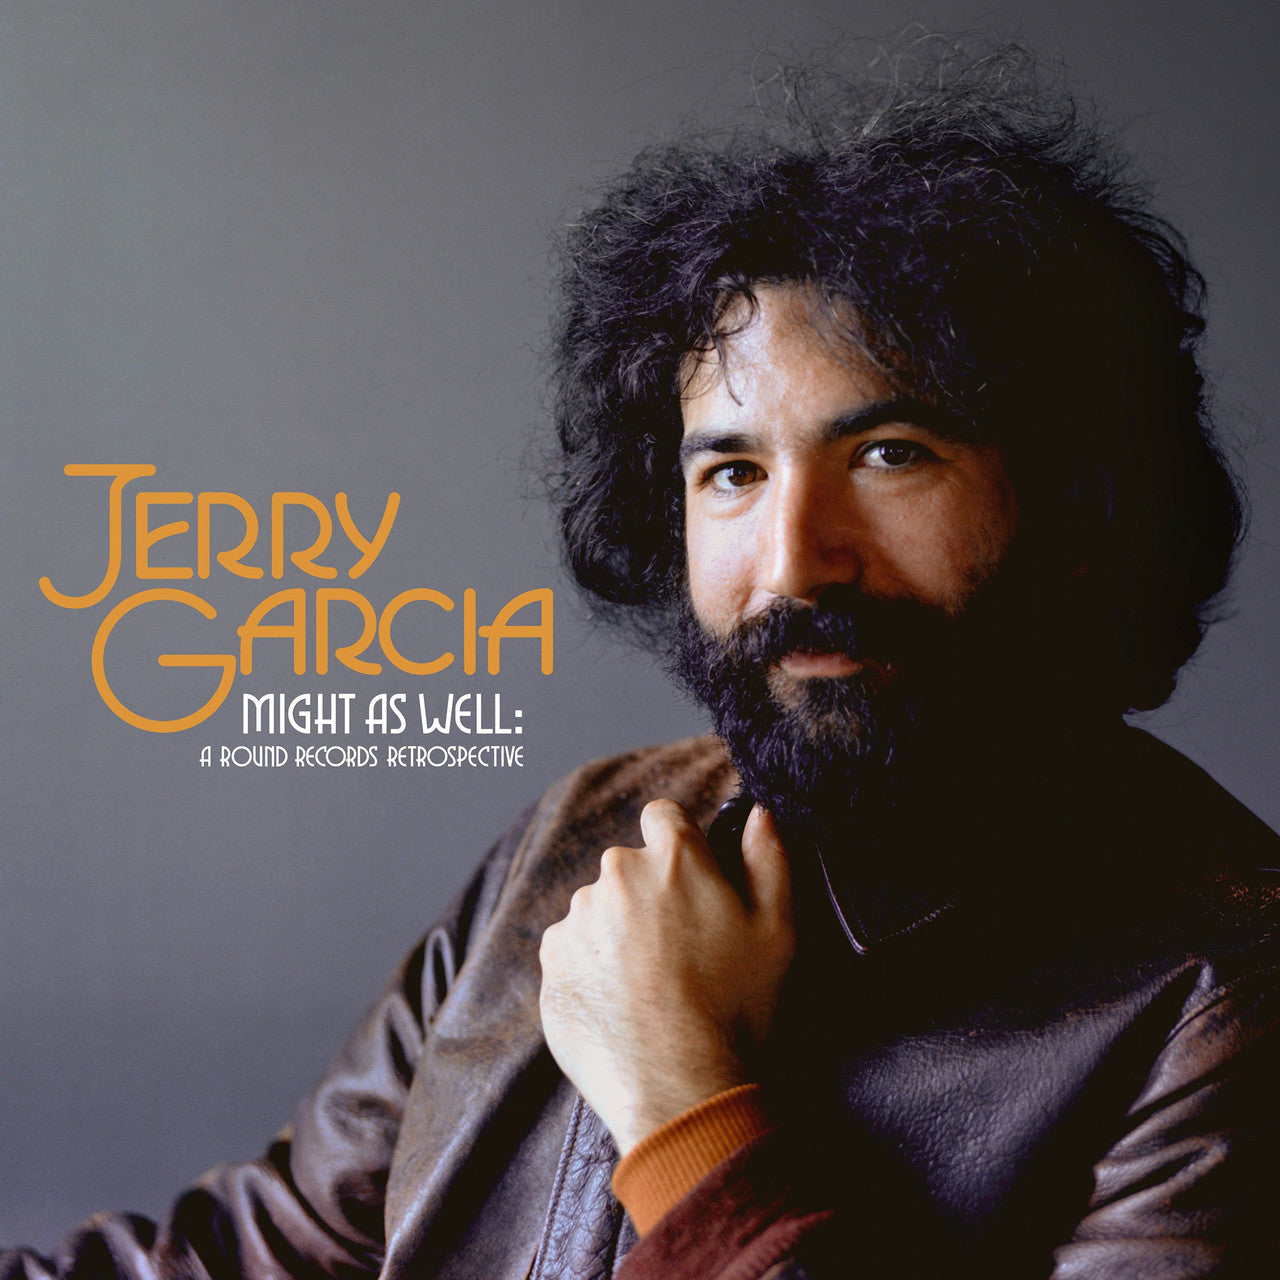 JERRY GARCIA - MIGHT AS WELL: A ROUND RECORDS RETROSPECTIVE - 2-LP - VINYL LP